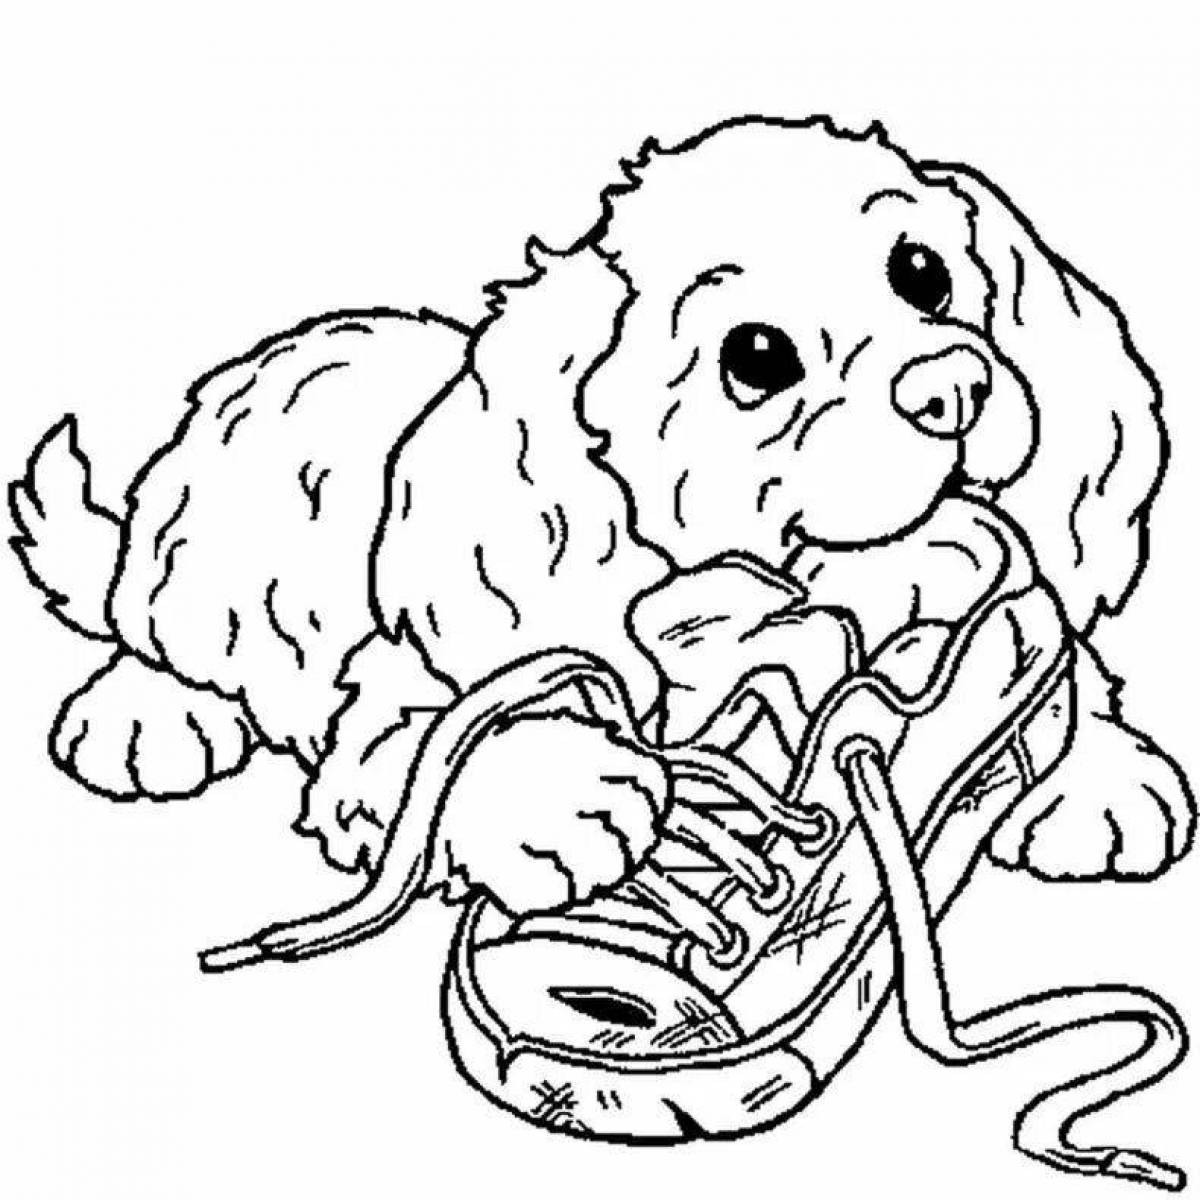 Exciting spaniel coloring book